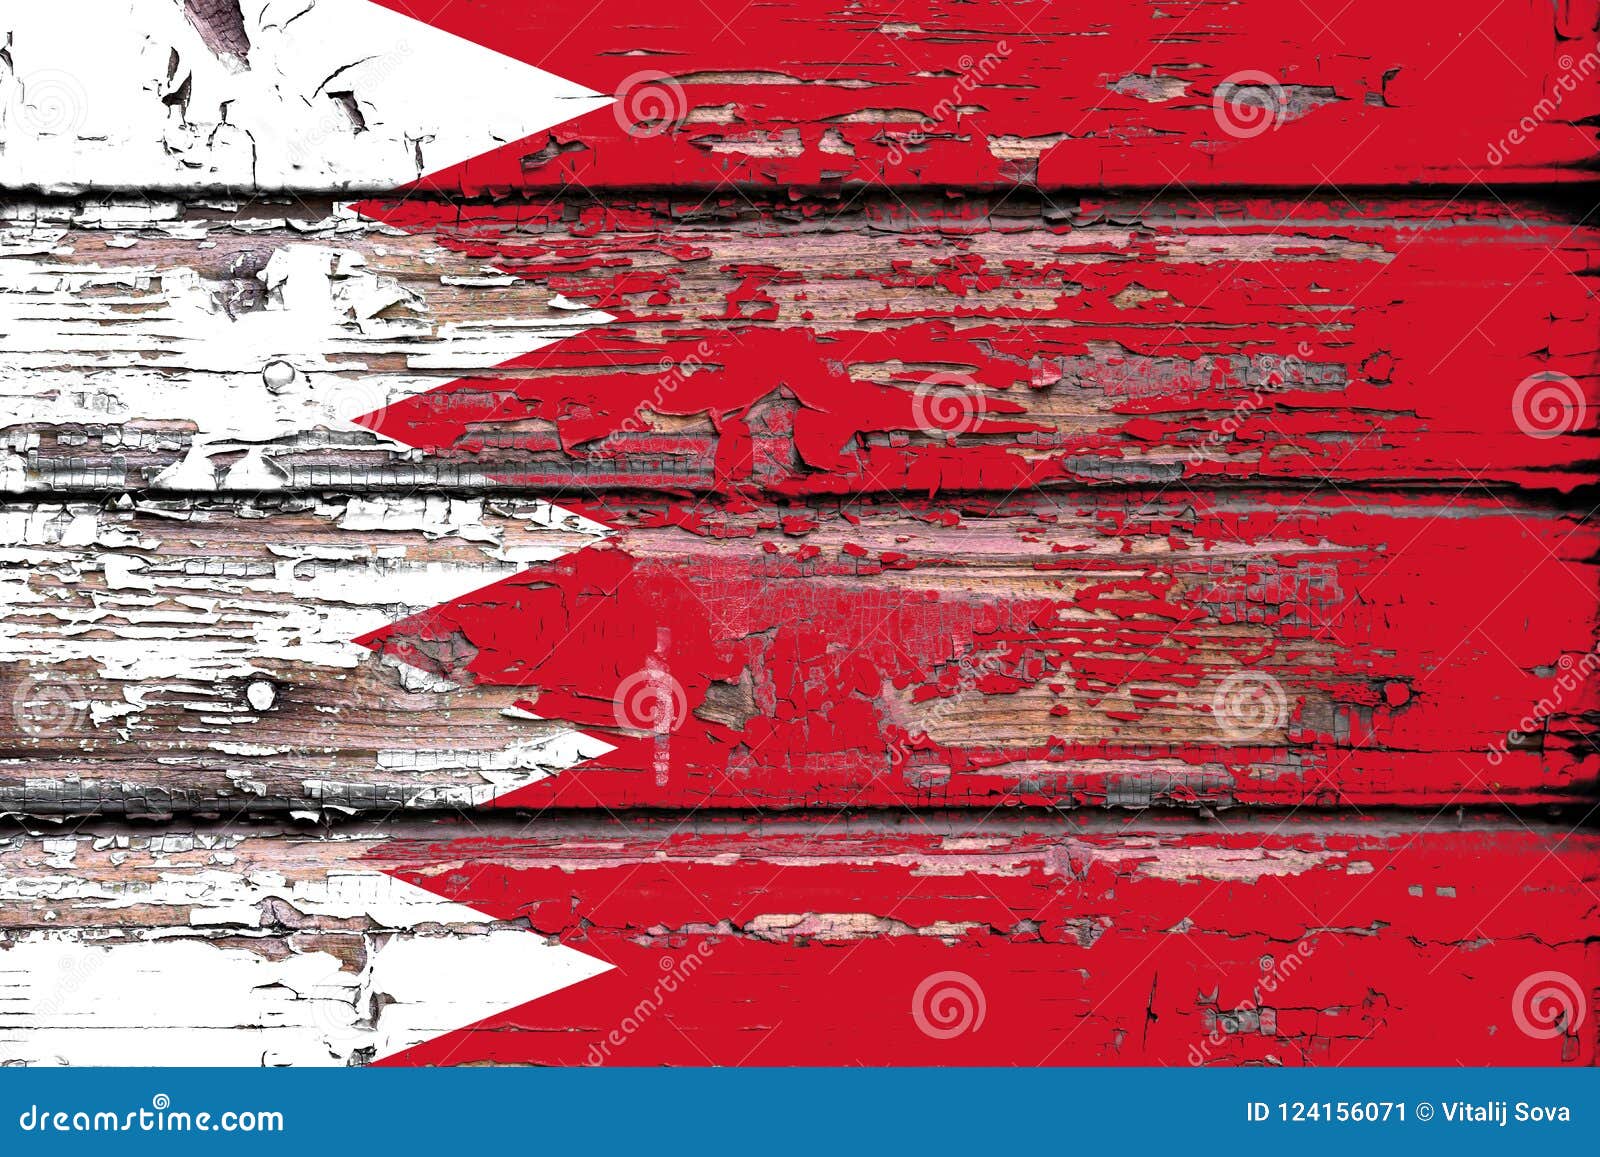 national flag of bahrein on a wooden background